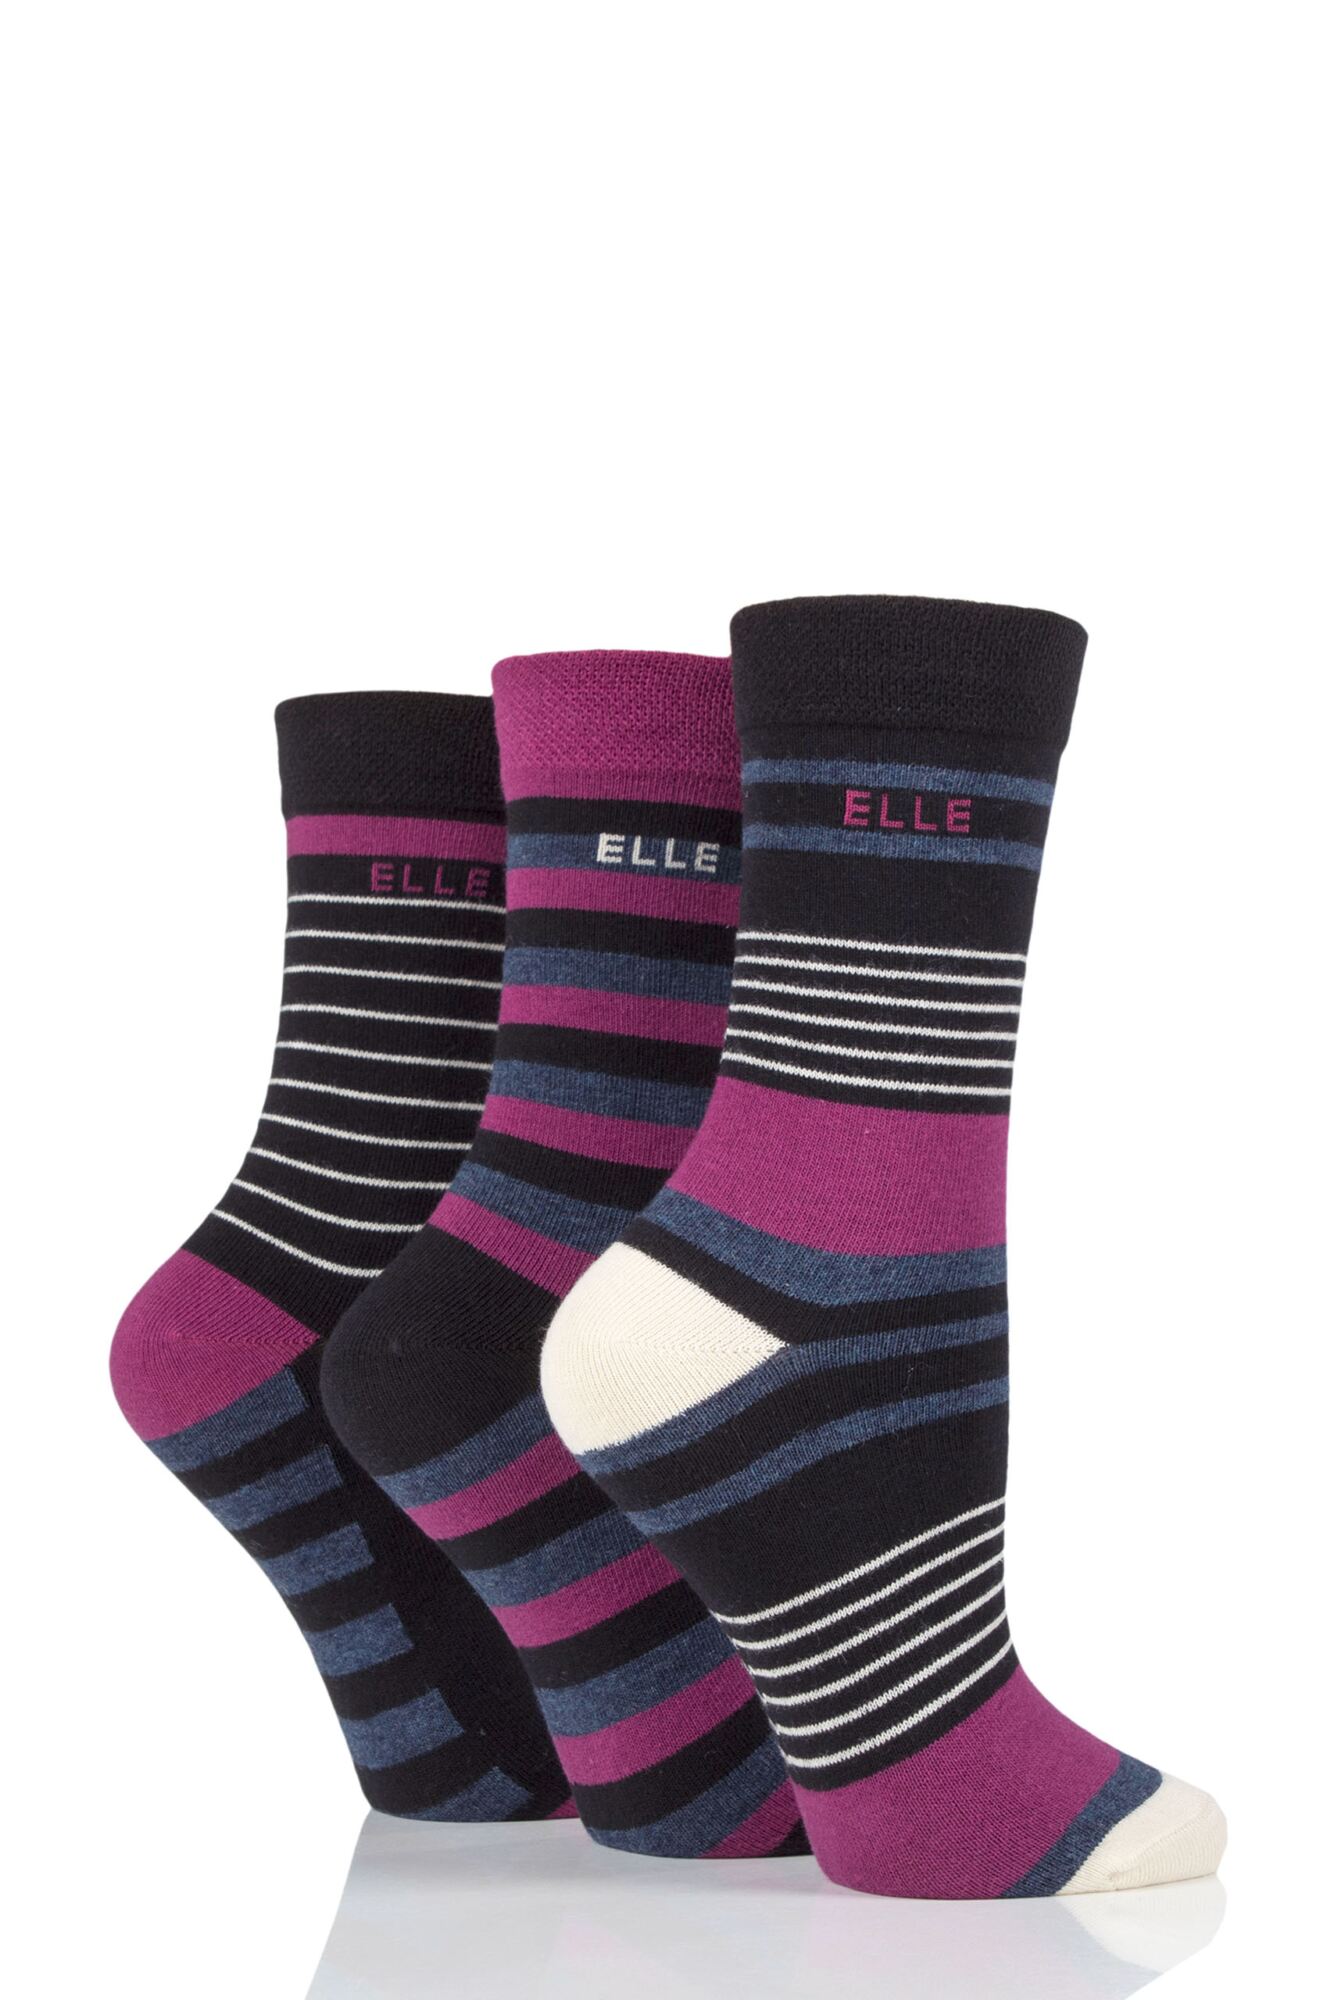 3 Pair Combed Cotton Plain, Stripe and Contrast Heel and Toe Ladies - Elle